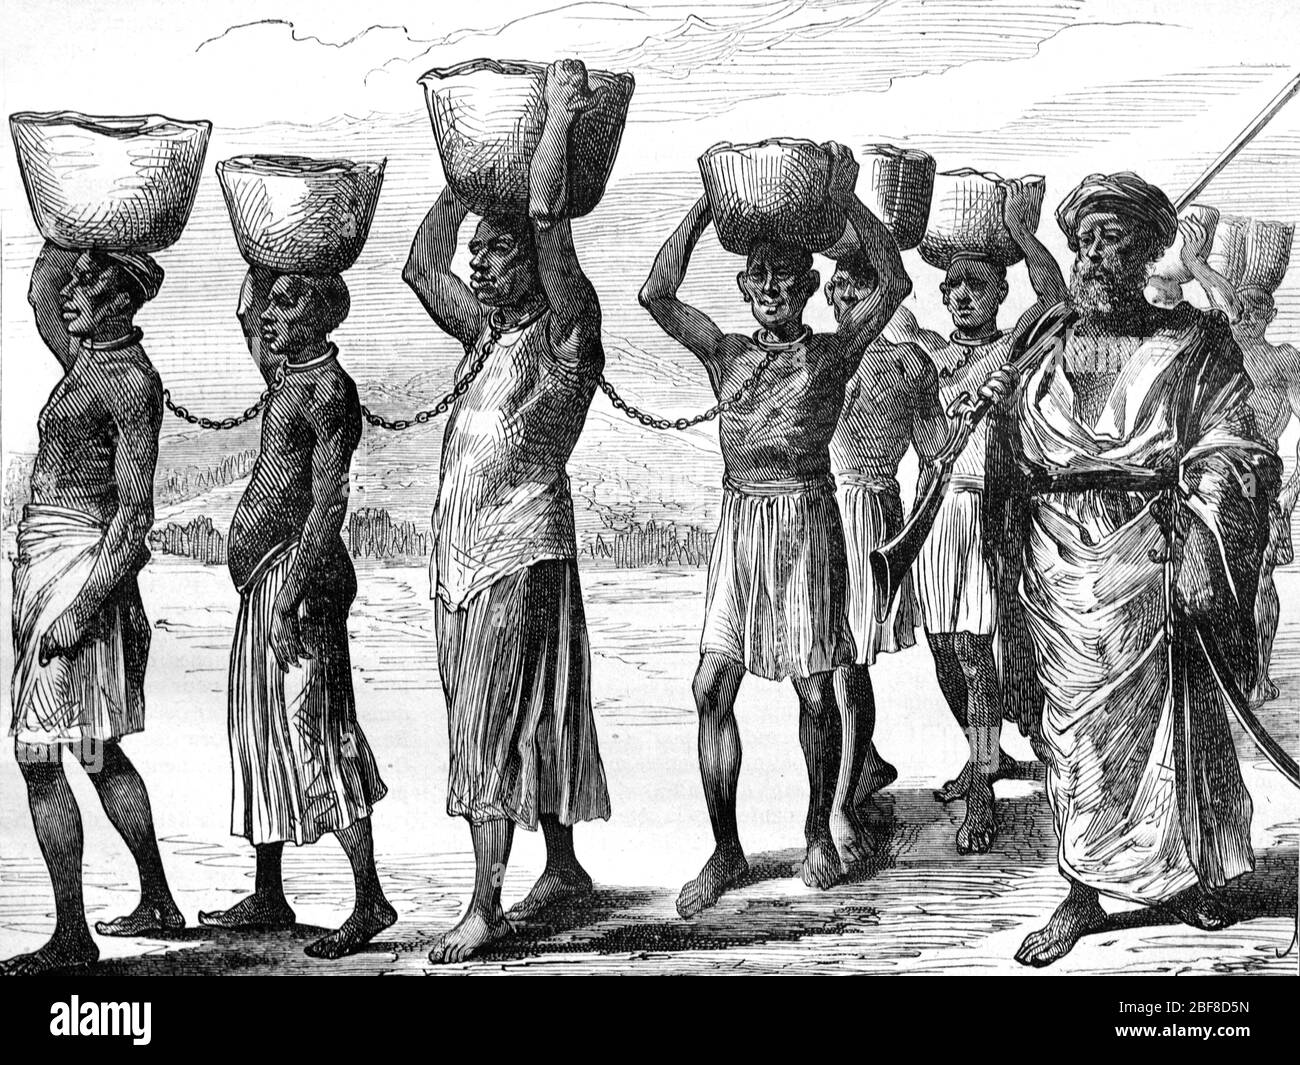 Arab Slave Trader Leading Chained African Slaves in Zanzibar Tanzania Africa. Vintage or Old Illustration or Engraving 1889 Stock Photo